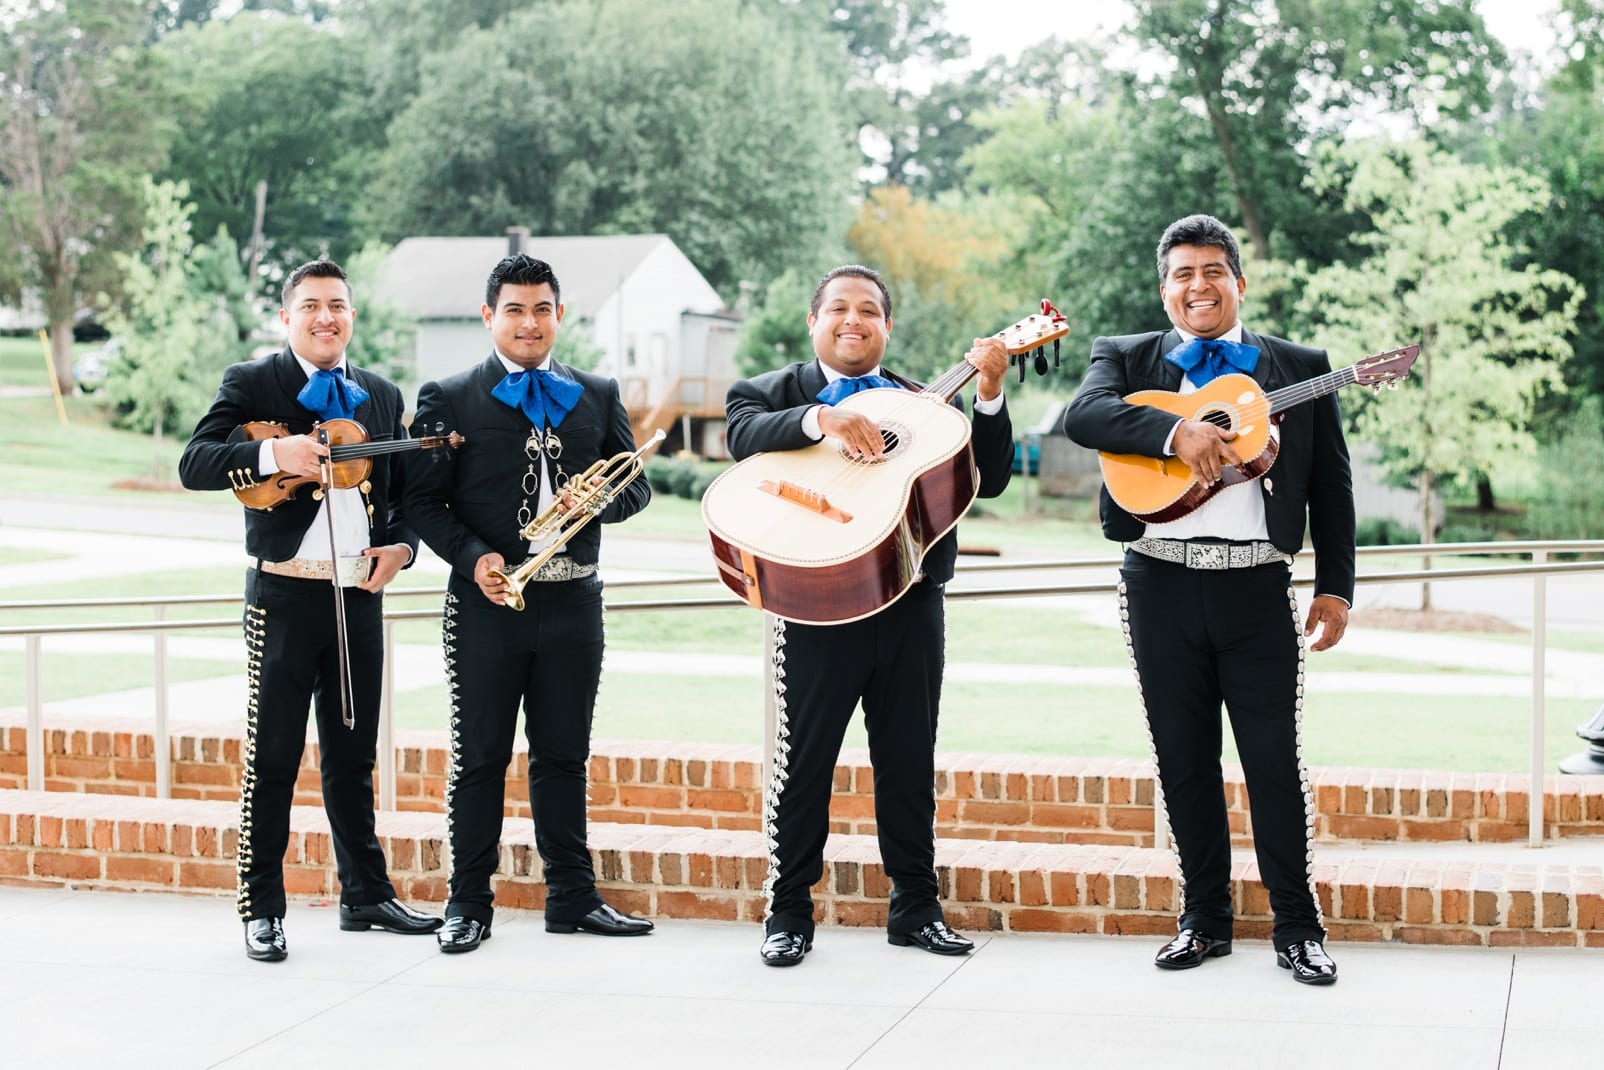 Full mariachi band leaving the ceremony site photo